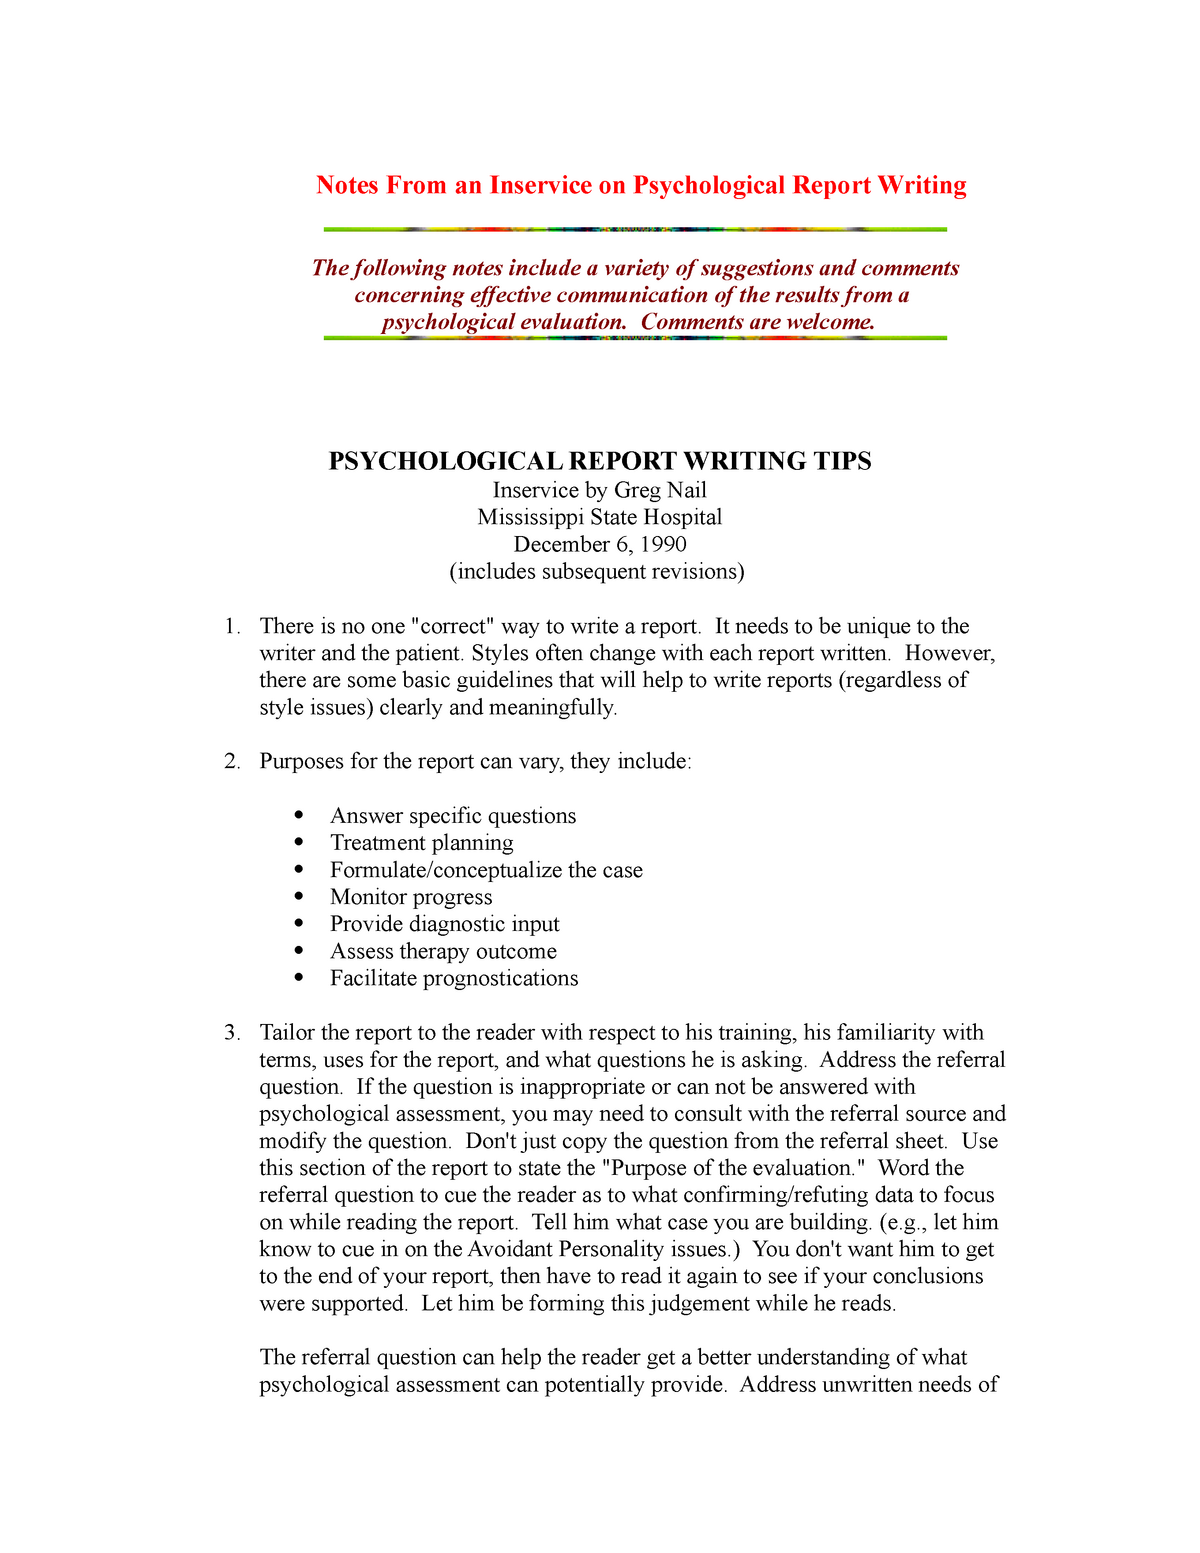 Psychological Assessment Report Template